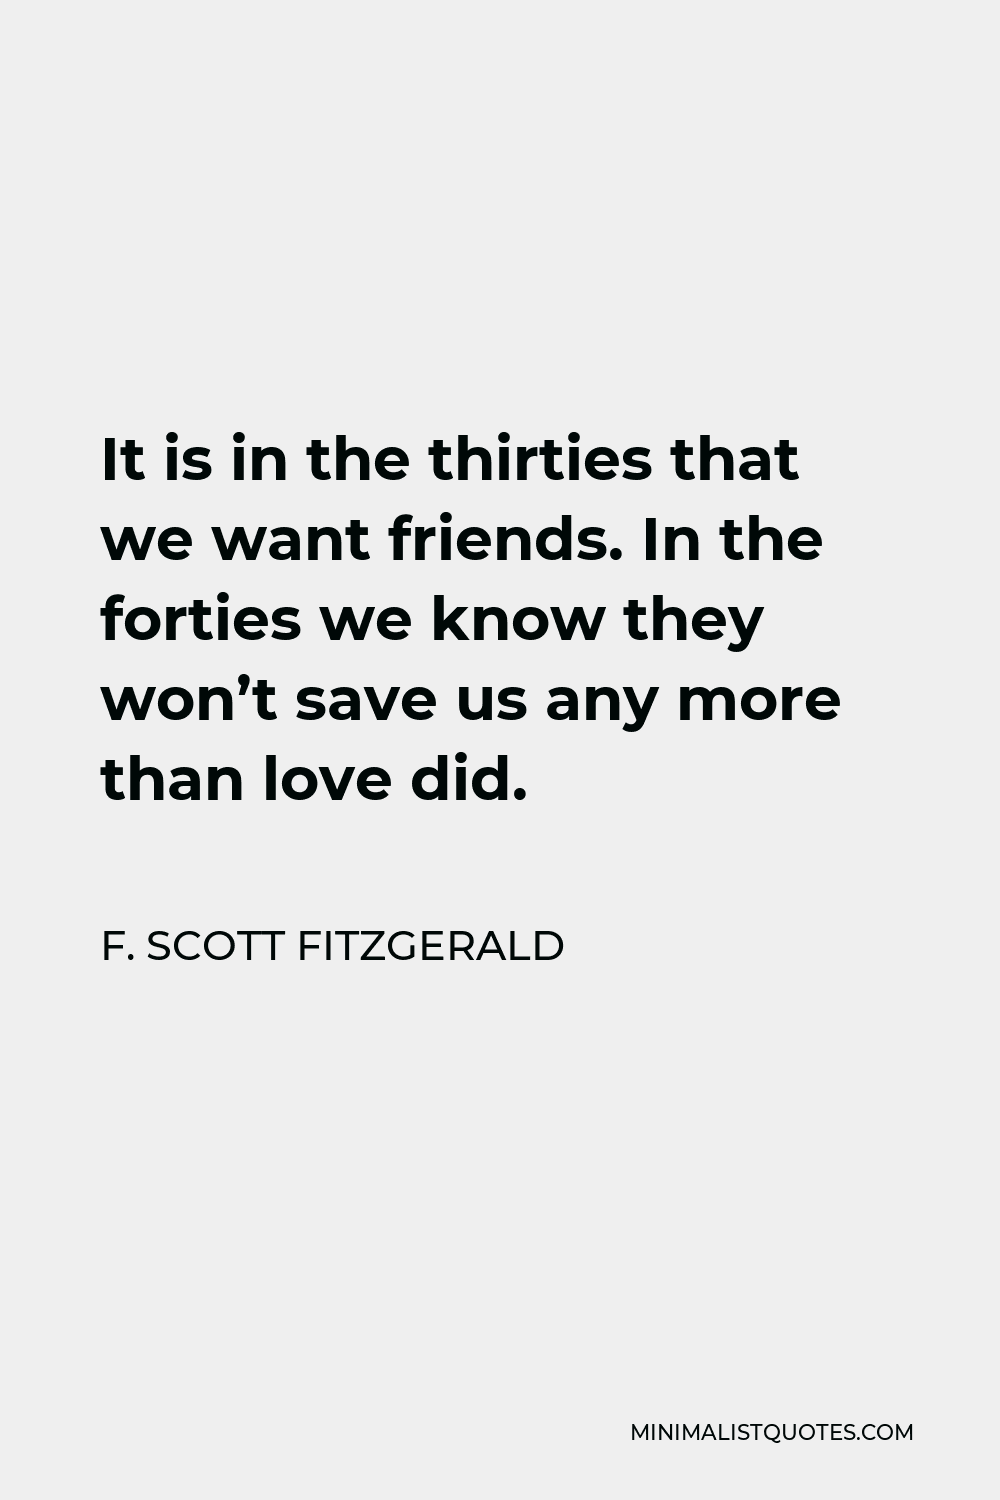 F. Scott Fitzgerald Quote - It is in the thirties that we want friends. In the forties we know they won’t save us any more than love did.